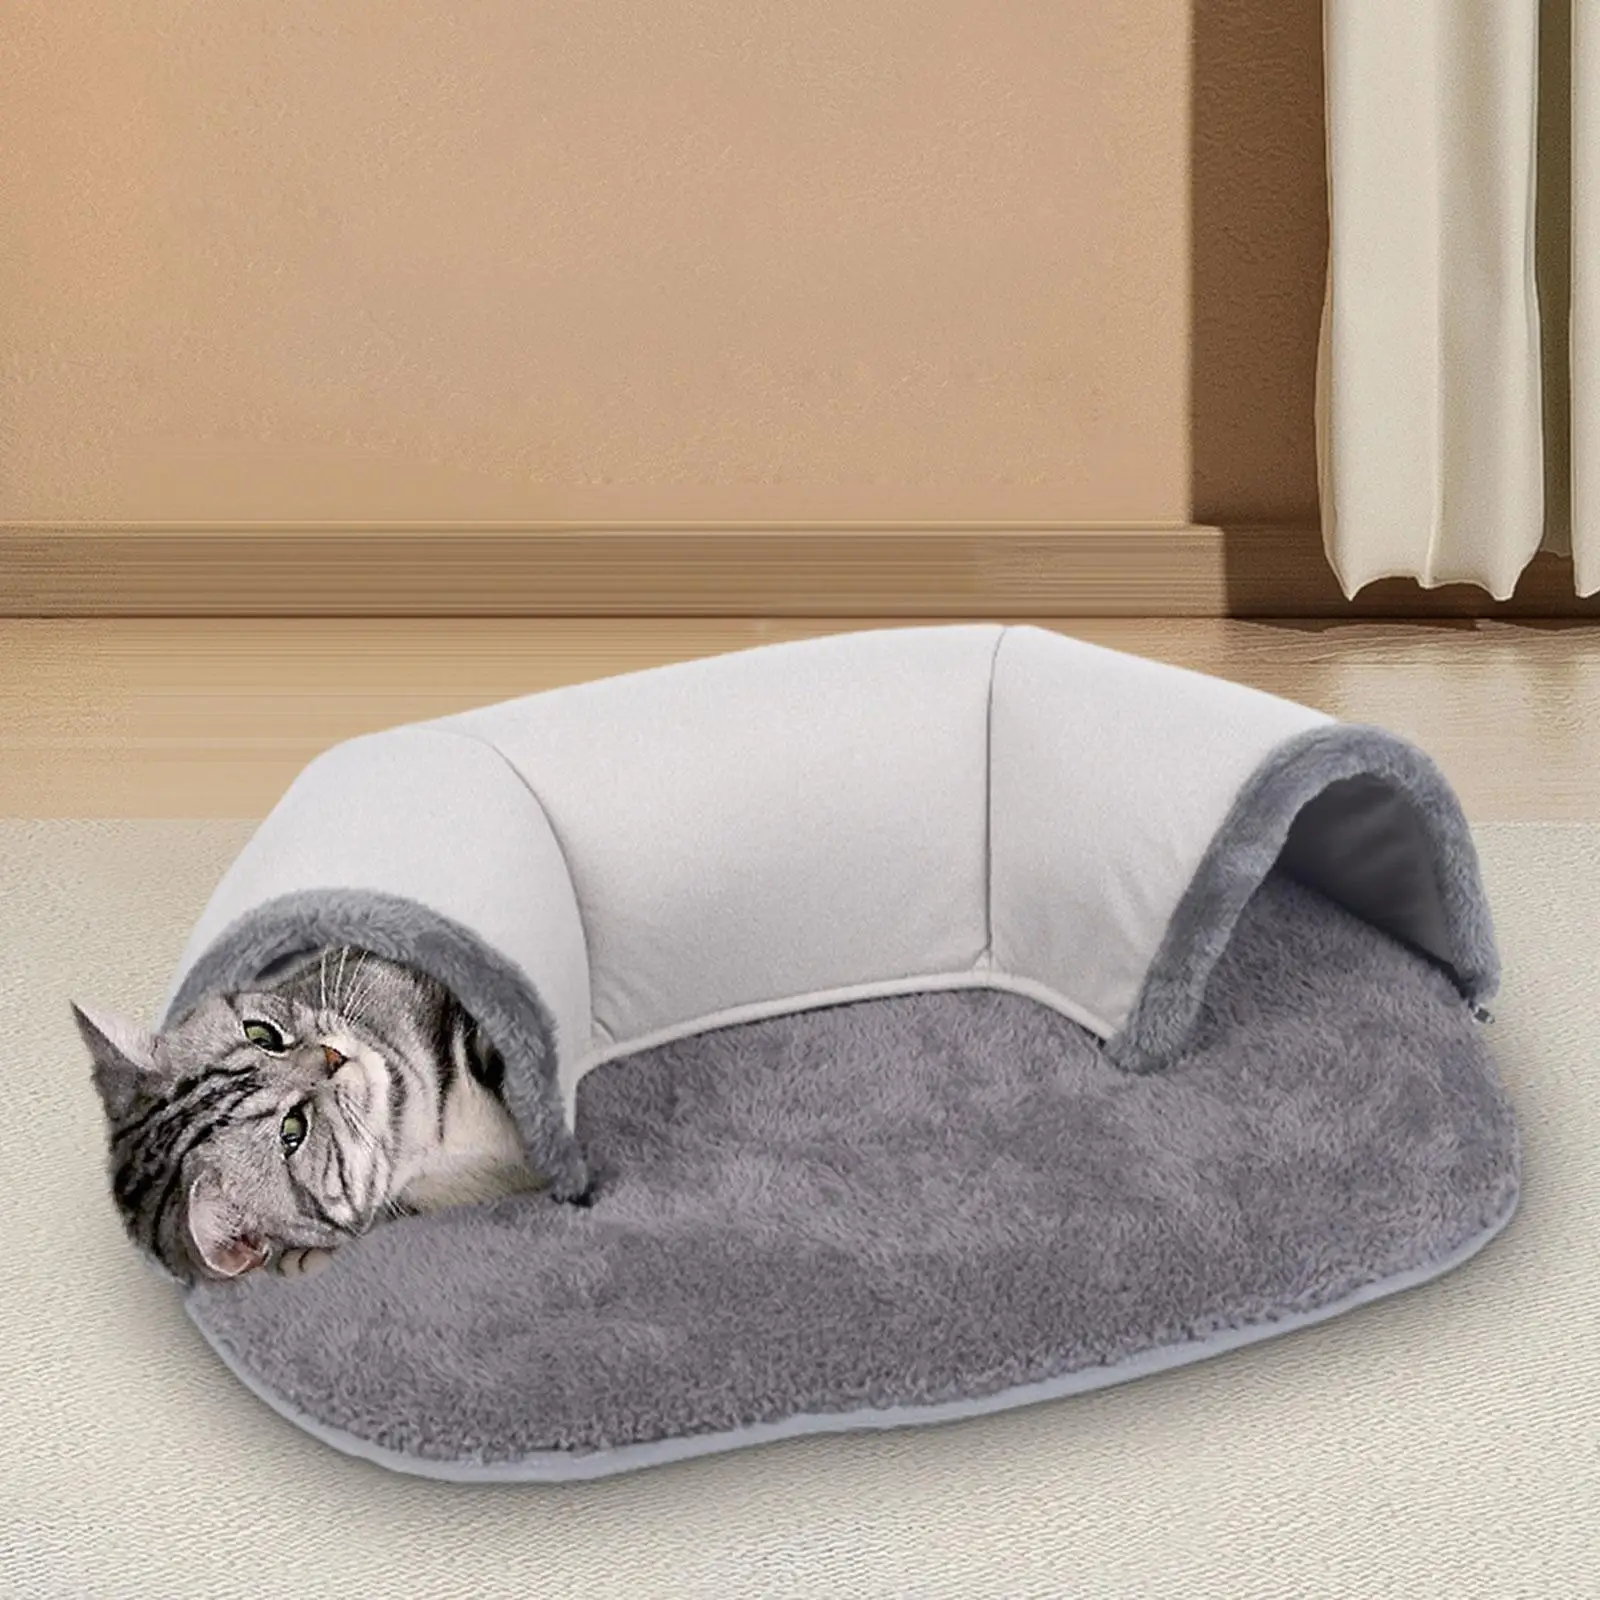 2 in 1 Cat Tunnel Bed Washable Soft Plush Mat Anti Slip Bottom for Kitten Puppy for Indoor Cats Cat Warm House with Toy Ball Fun